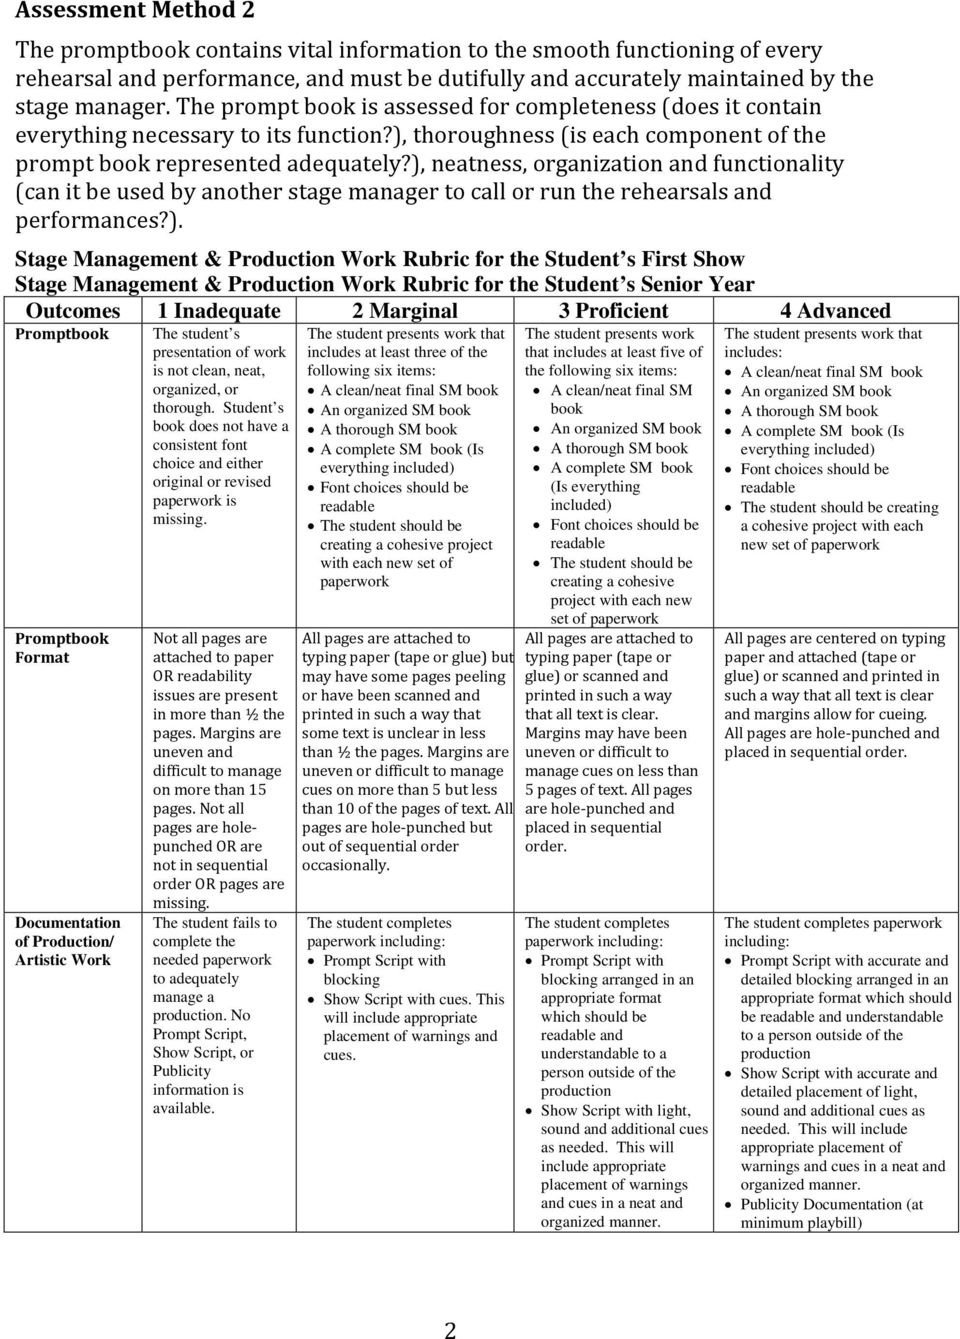 ), neatness, organization and functionality (can it be used by another stage manager to call or run the rehearsals and performances?). Stage Management & Production Work Rubric for the Student s